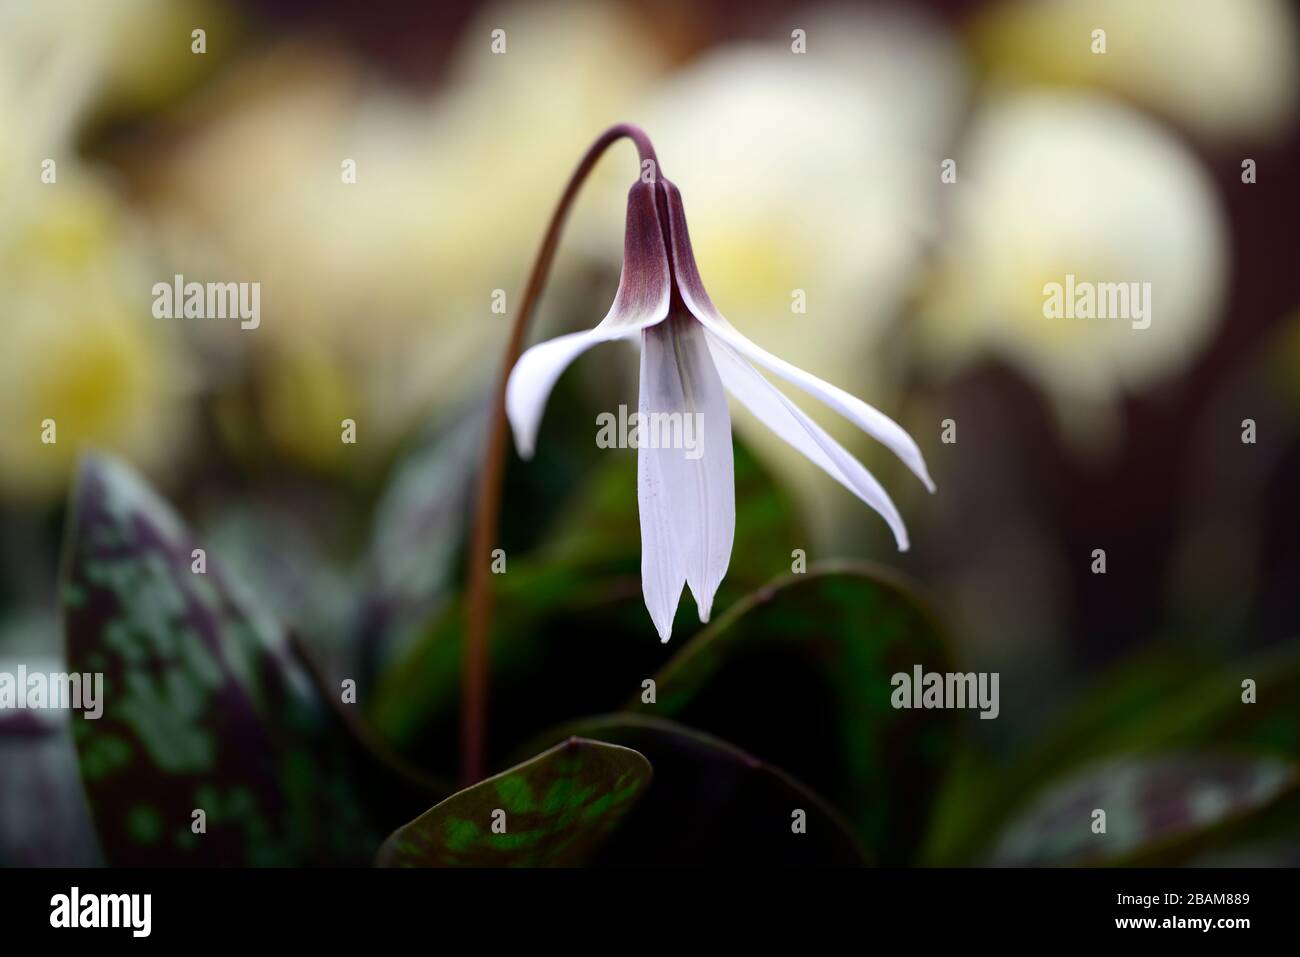 erythronium dens canis snowflake,white purple flowers,flower,flowering dog's tooth violet,spring,flowers,flower,flowering,mottled foliage,RM Floral Stock Photo